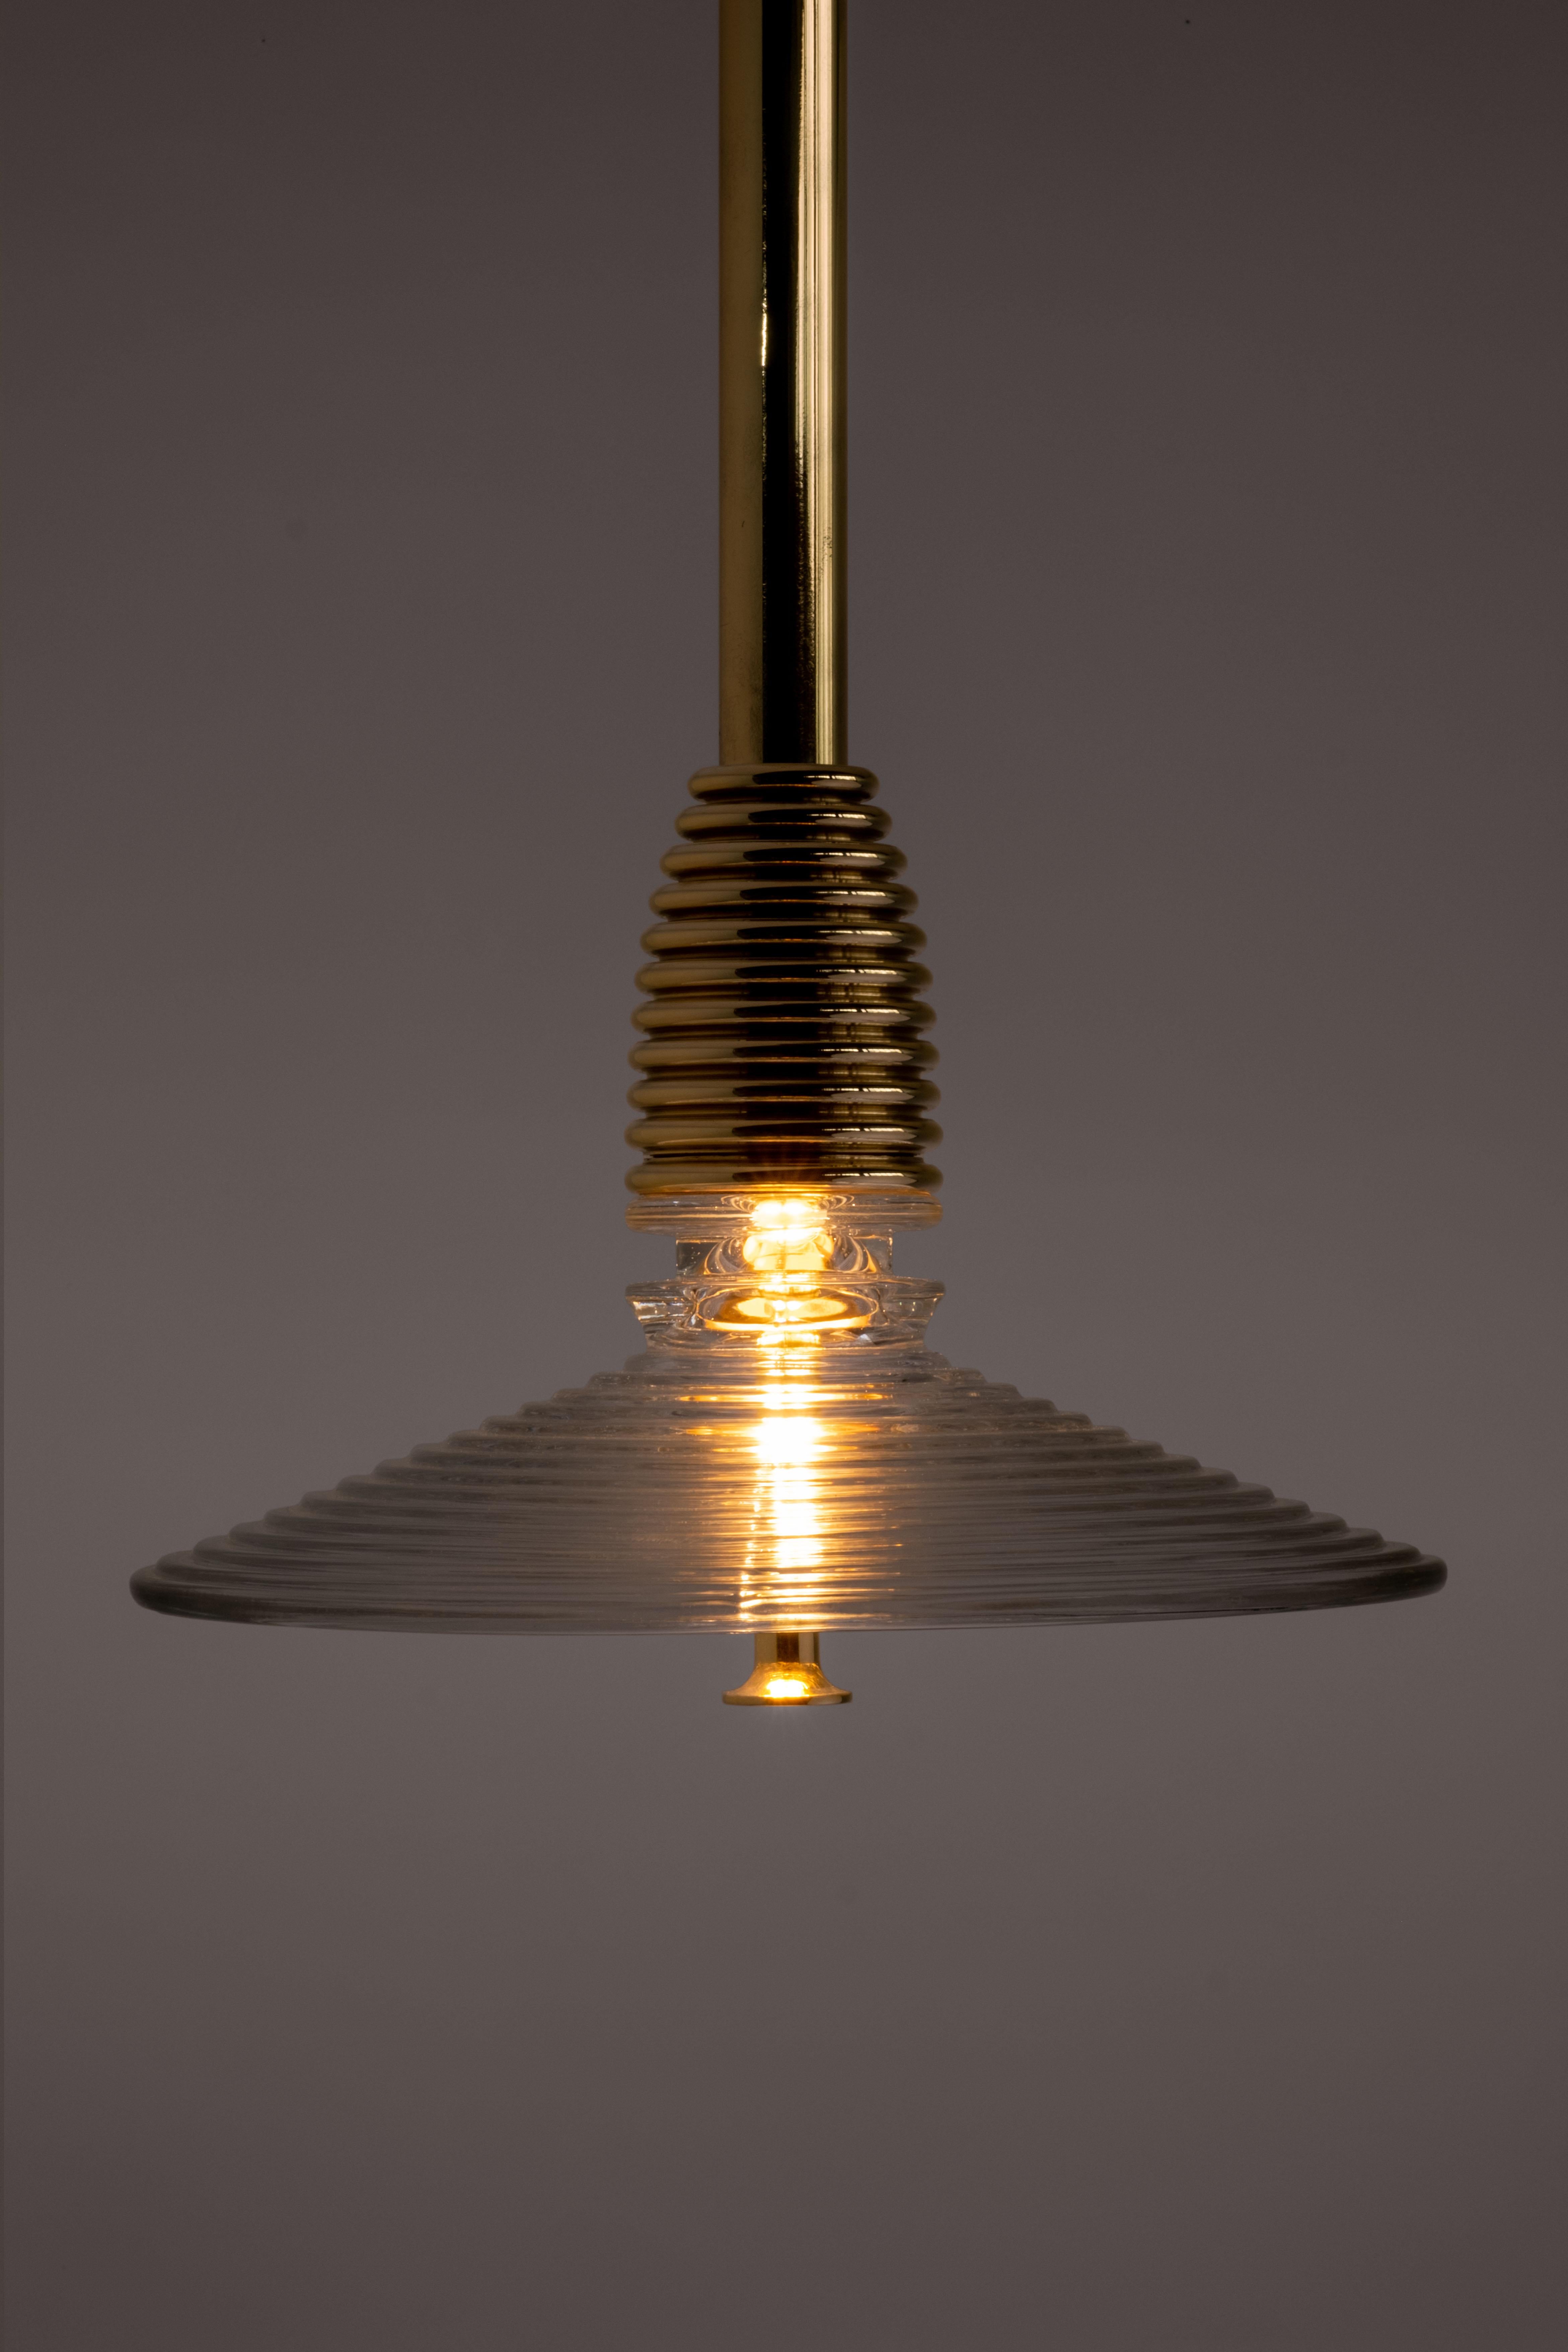 The Insulator 'B' Pendant in dark brass and clear glass by NOVOCASTRIAN deco For Sale 3